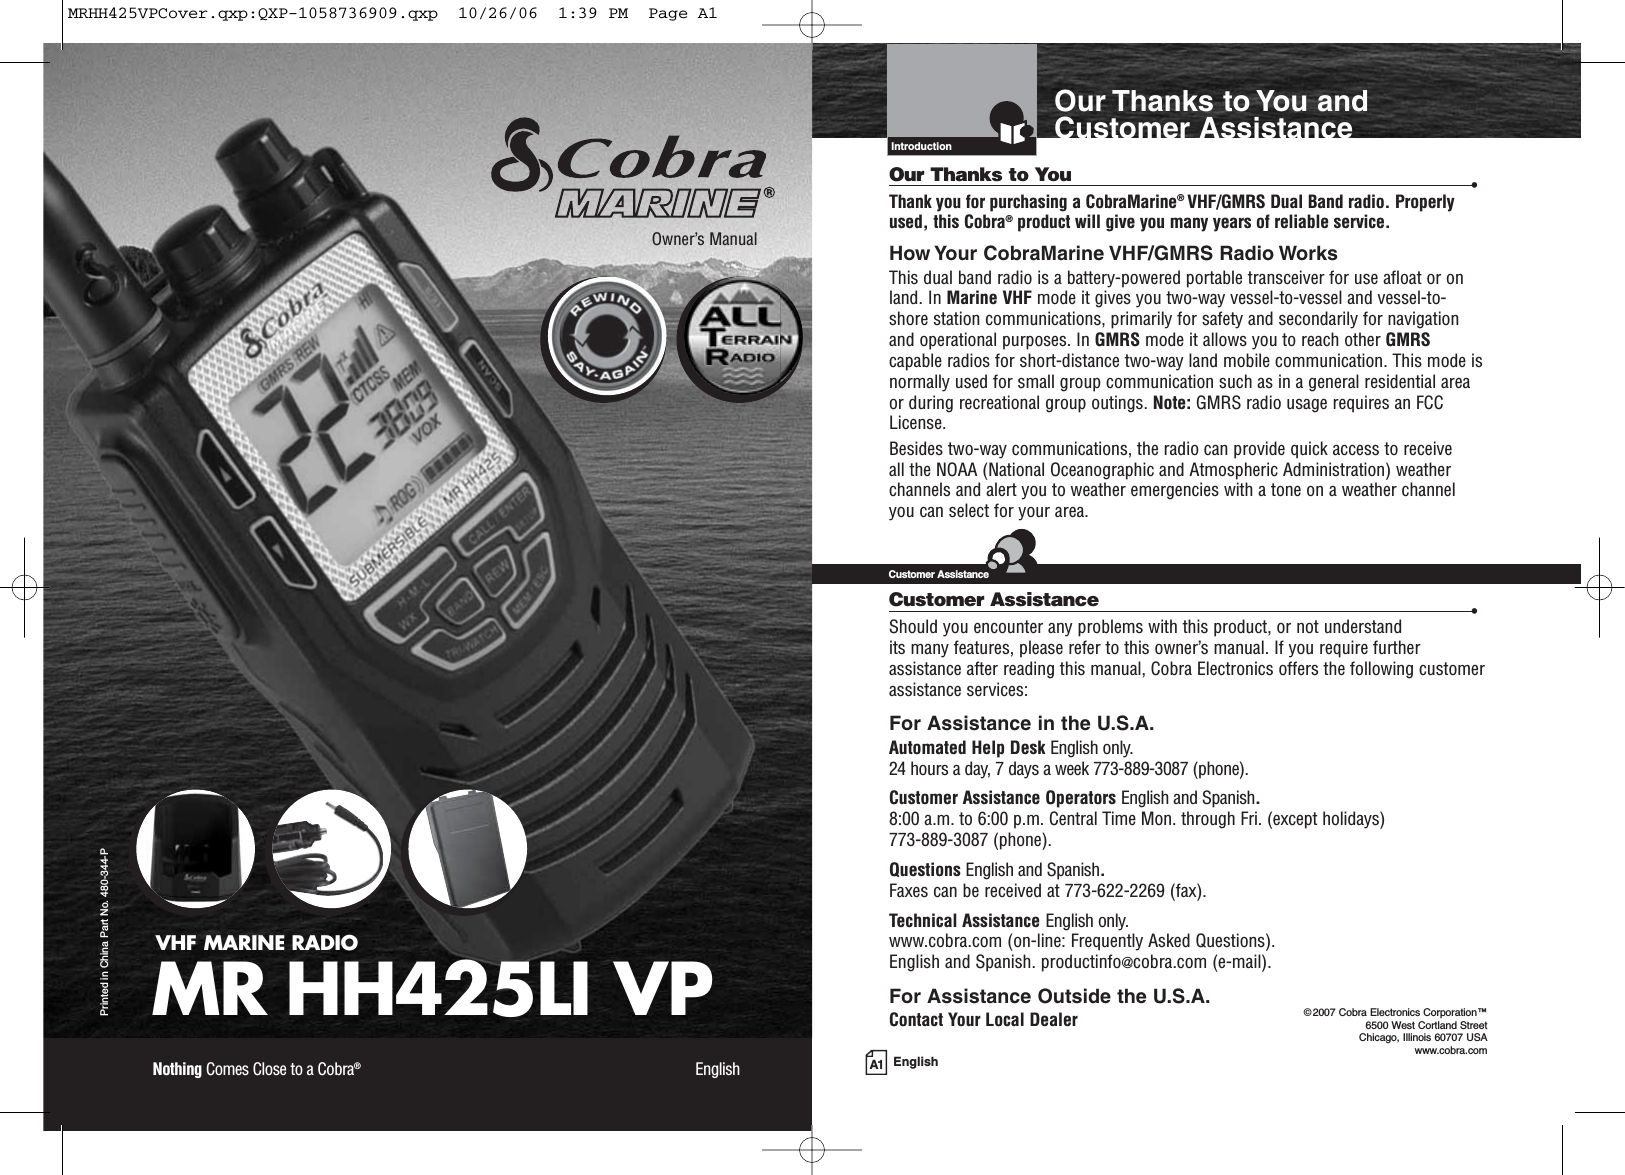 A1 EnglishOur Thanks to You andCustomer AssistanceIntroductionVHF MARINE RADIOMR HH425LI VPPrinted in China Part No. 480-344-POwner’s ManualNothing Comes Close to a Cobra®EnglishOur Thanks to You •Thank you for purchasing a CobraMarine®VHF/GMRS Dual Band radio. Properlyused, this Cobra®product will give you many years of reliable service.How Your CobraMarine VHF/GMRS Radio WorksThis dual band radio is a battery-powered portable transceiver for use afloat or onland. In Marine VHF mode it gives you two-way vessel-to-vessel and vessel-to-shore station communications, primarily for safety and secondarily for navigationand operational purposes. In GMRS mode it allows you to reach other GMRScapable radios for short-distance two-way land mobile communication. This mode isnormally used for small group communication such as in a general residential areaor during recreational group outings. Note: GMRS radio usage requires an FCCLicense.Besides two-way communications, the radio can provide quick access to receive all the NOAA (National Oceanographic and Atmospheric Administration) weatherchannels and alert you to weather emergencies with a tone on a weather channelyou can select for your area.Customer Assistance •Should you encounter any problems with this product, or not understand its many features, please refer to this owner’s manual. If you require furtherassistance after reading this manual, Cobra Electronics offers the following customerassistance services:For Assistance in the U.S.A. Automated Help Desk English only.24 hours a day, 7 days a week 773-889-3087 (phone).Customer Assistance Operators English and Spanish.8:00 a.m. to 6:00 p.m. Central Time Mon. through Fri. (except holidays) 773-889-3087 (phone).Questions English and Spanish.Faxes can be received at 773-622-2269 (fax).Technical Assistance English only.www.cobra.com (on-line: Frequently Asked Questions).English and Spanish. productinfo@cobra.com (e-mail).For Assistance Outside the U.S.A.Contact Your Local DealerCustomer Assistance©2007 Cobra Electronics Corporation™ 6500 West Cortland StreetChicago, Illinois 60707 USAwww.cobra.comMRHH425VPCover.qxp:QXP-1058736909.qxp  10/26/06  1:39 PM  Page A1